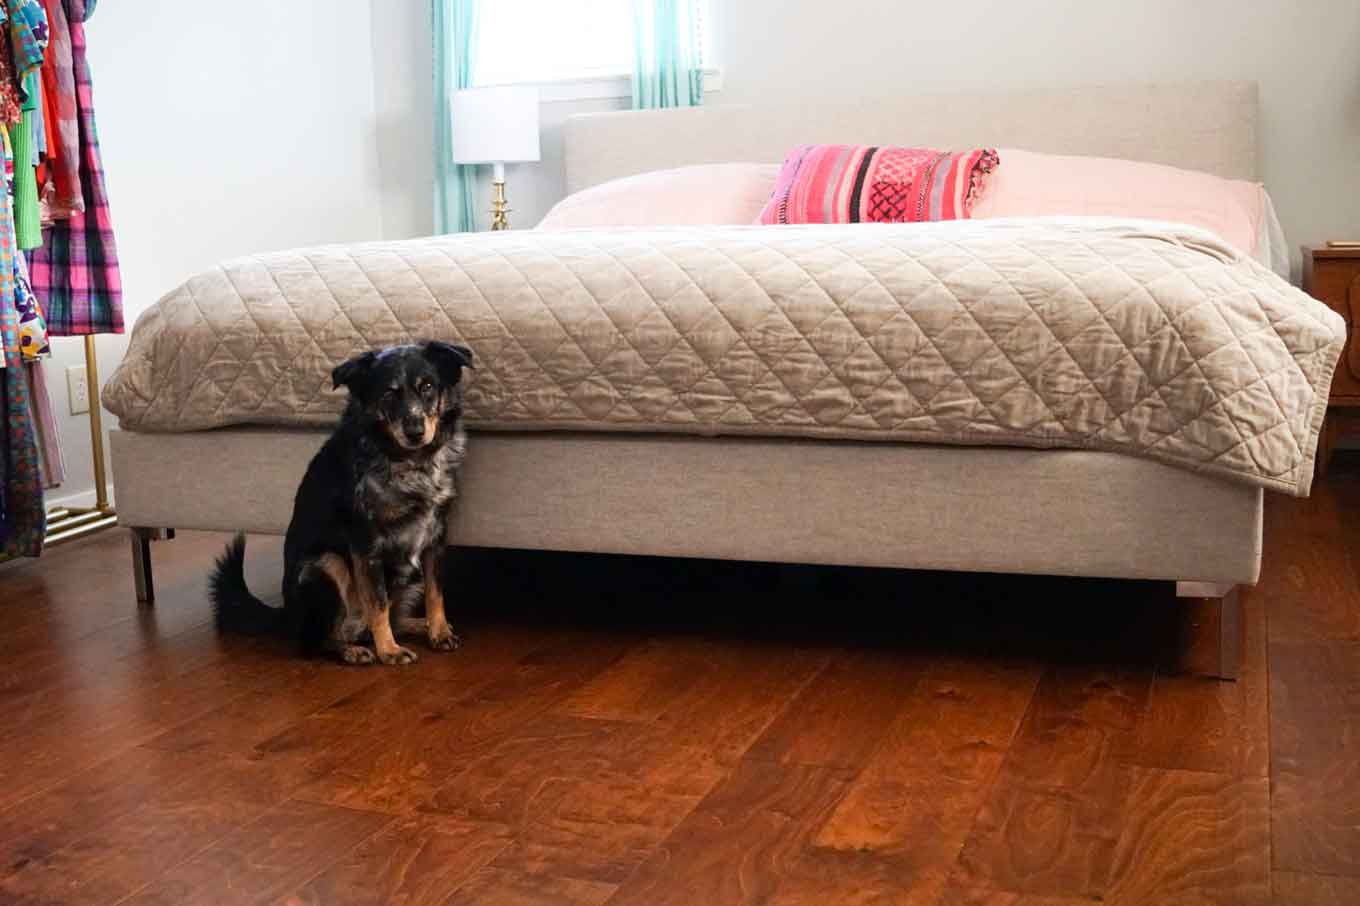 A black and gray dog sits in front of a bed